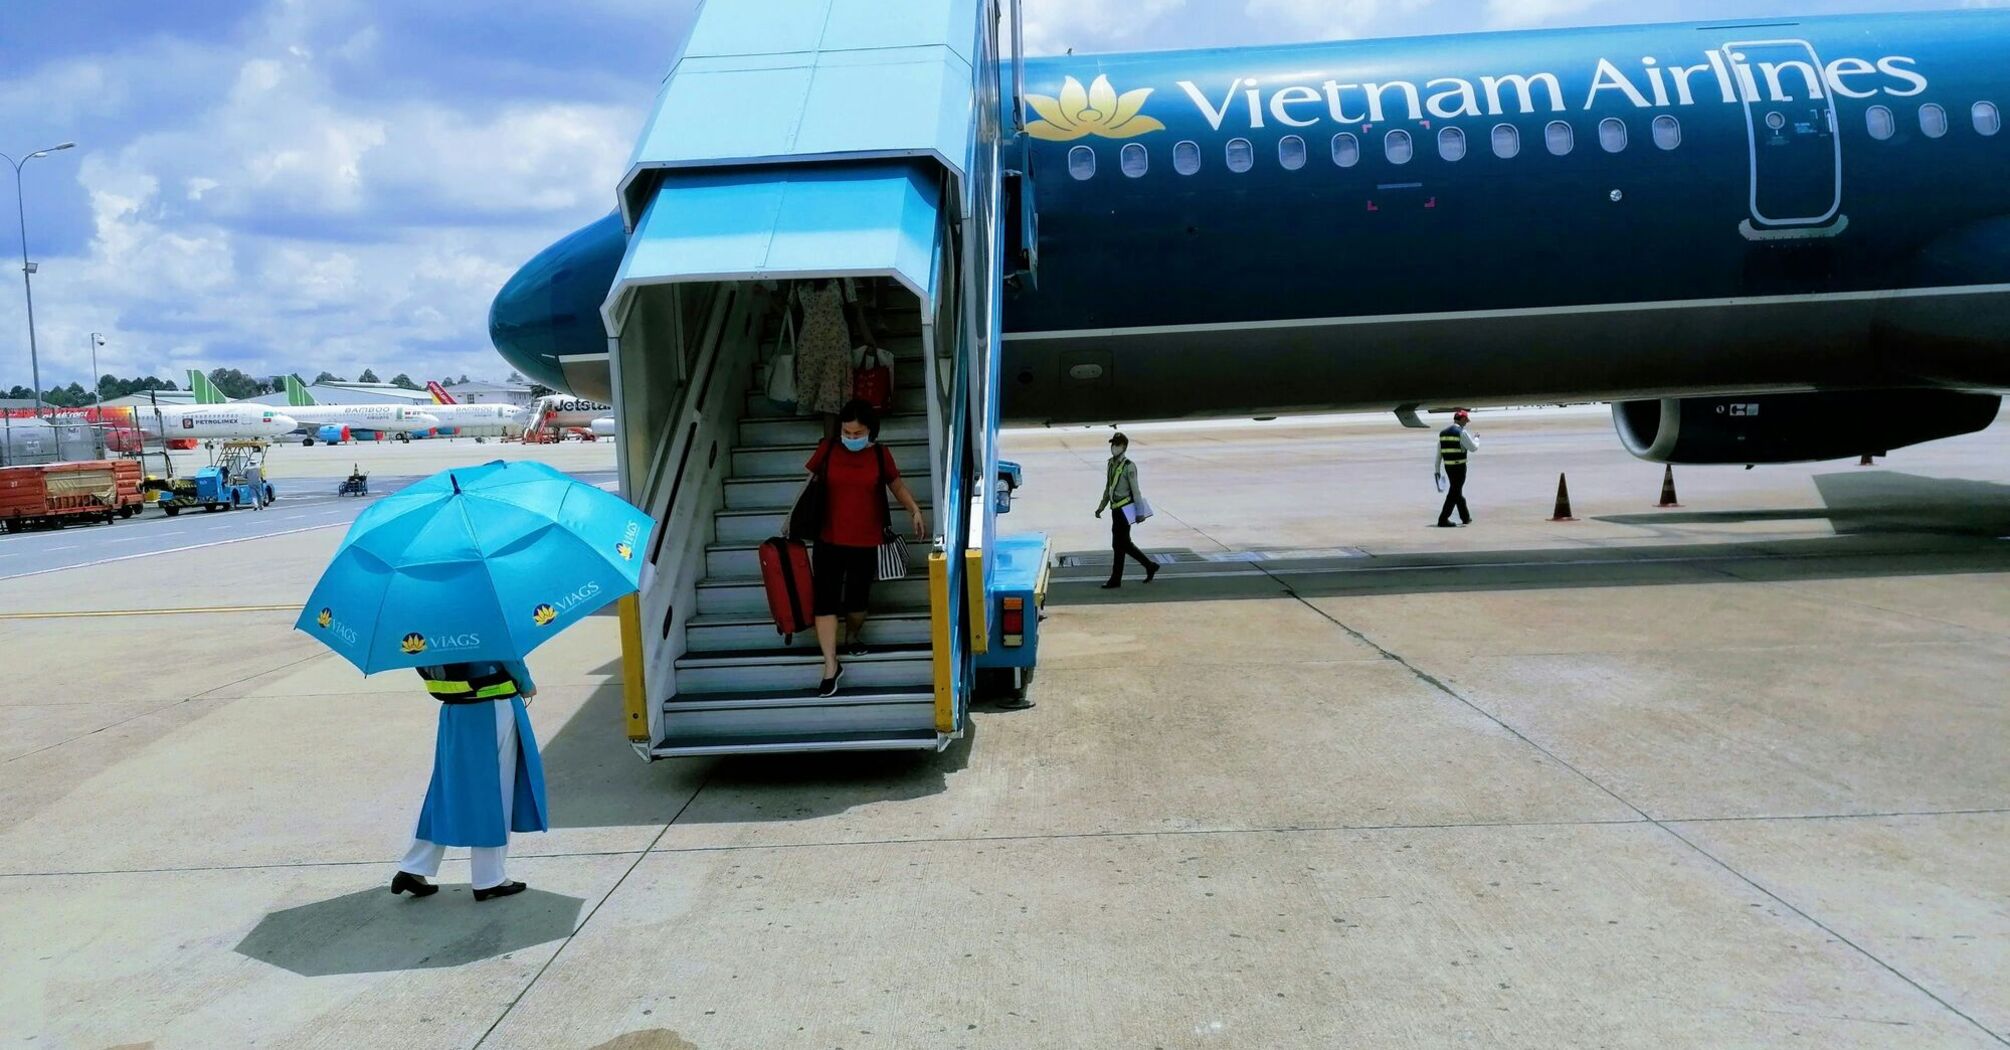 A passenger descending from a Vietnam Airlines aircraft with an attendant holding an umbrella at the foot of the stairway on the tarmac